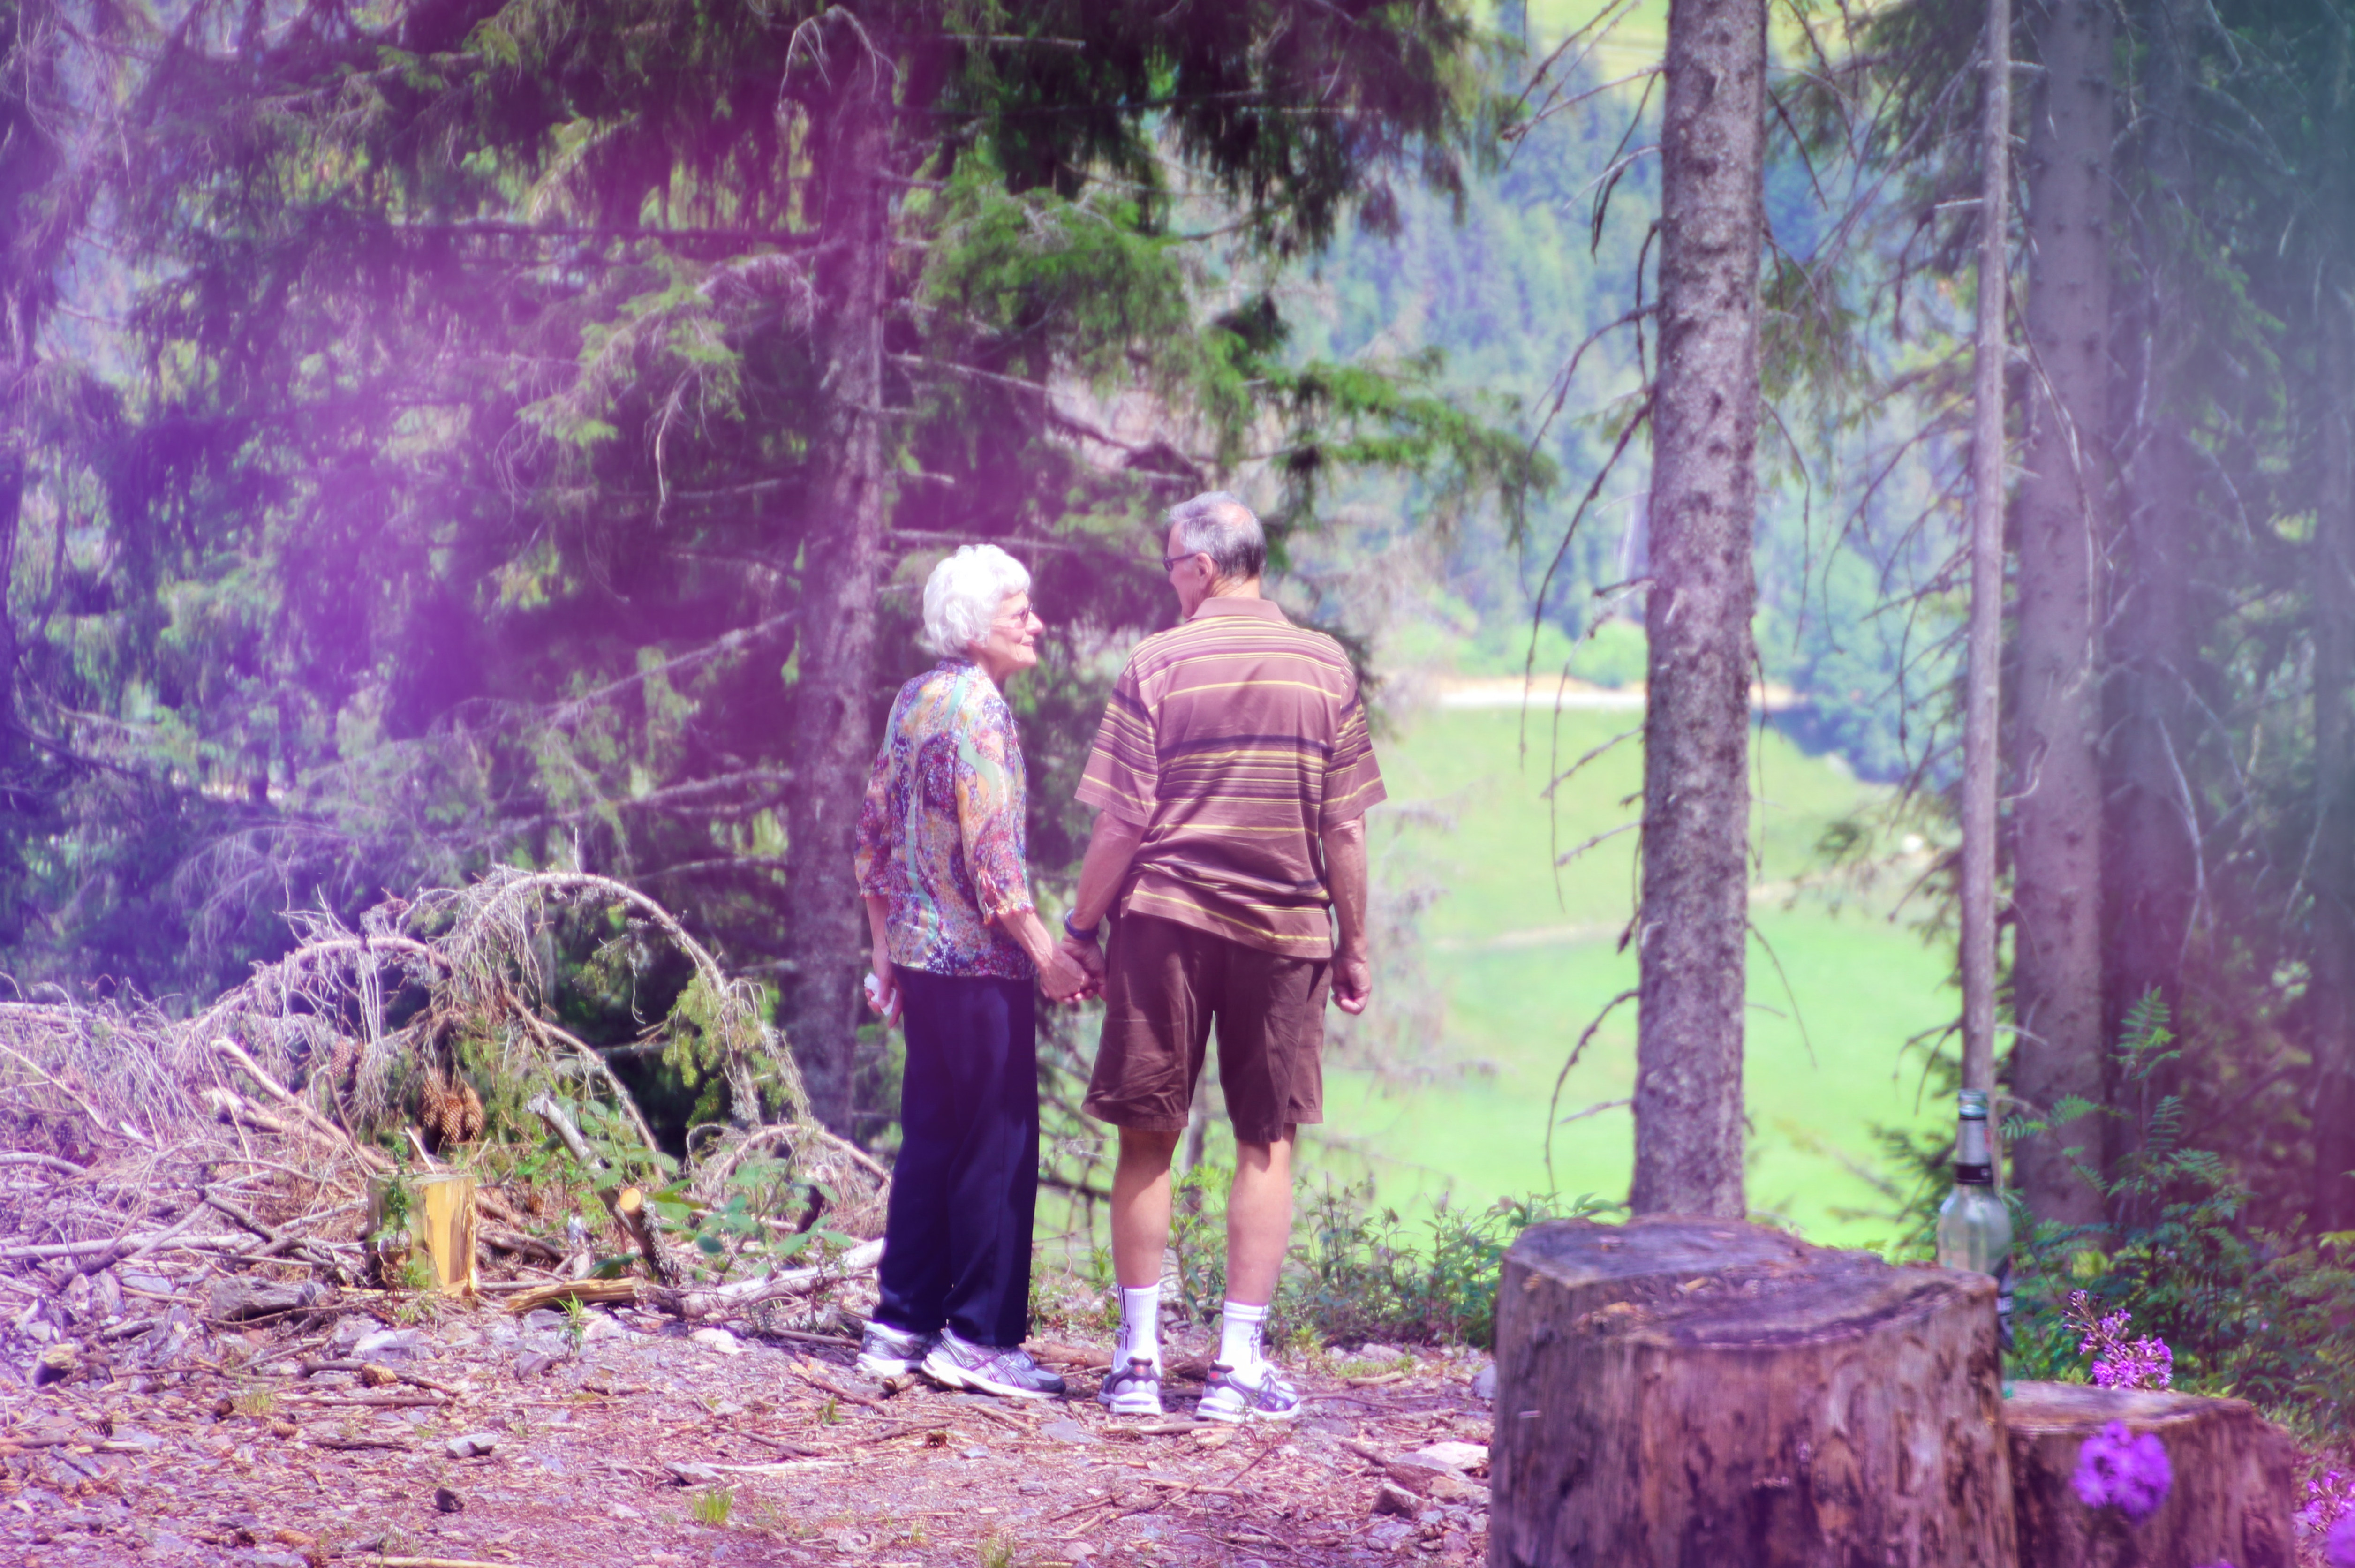 Old People in a forrest